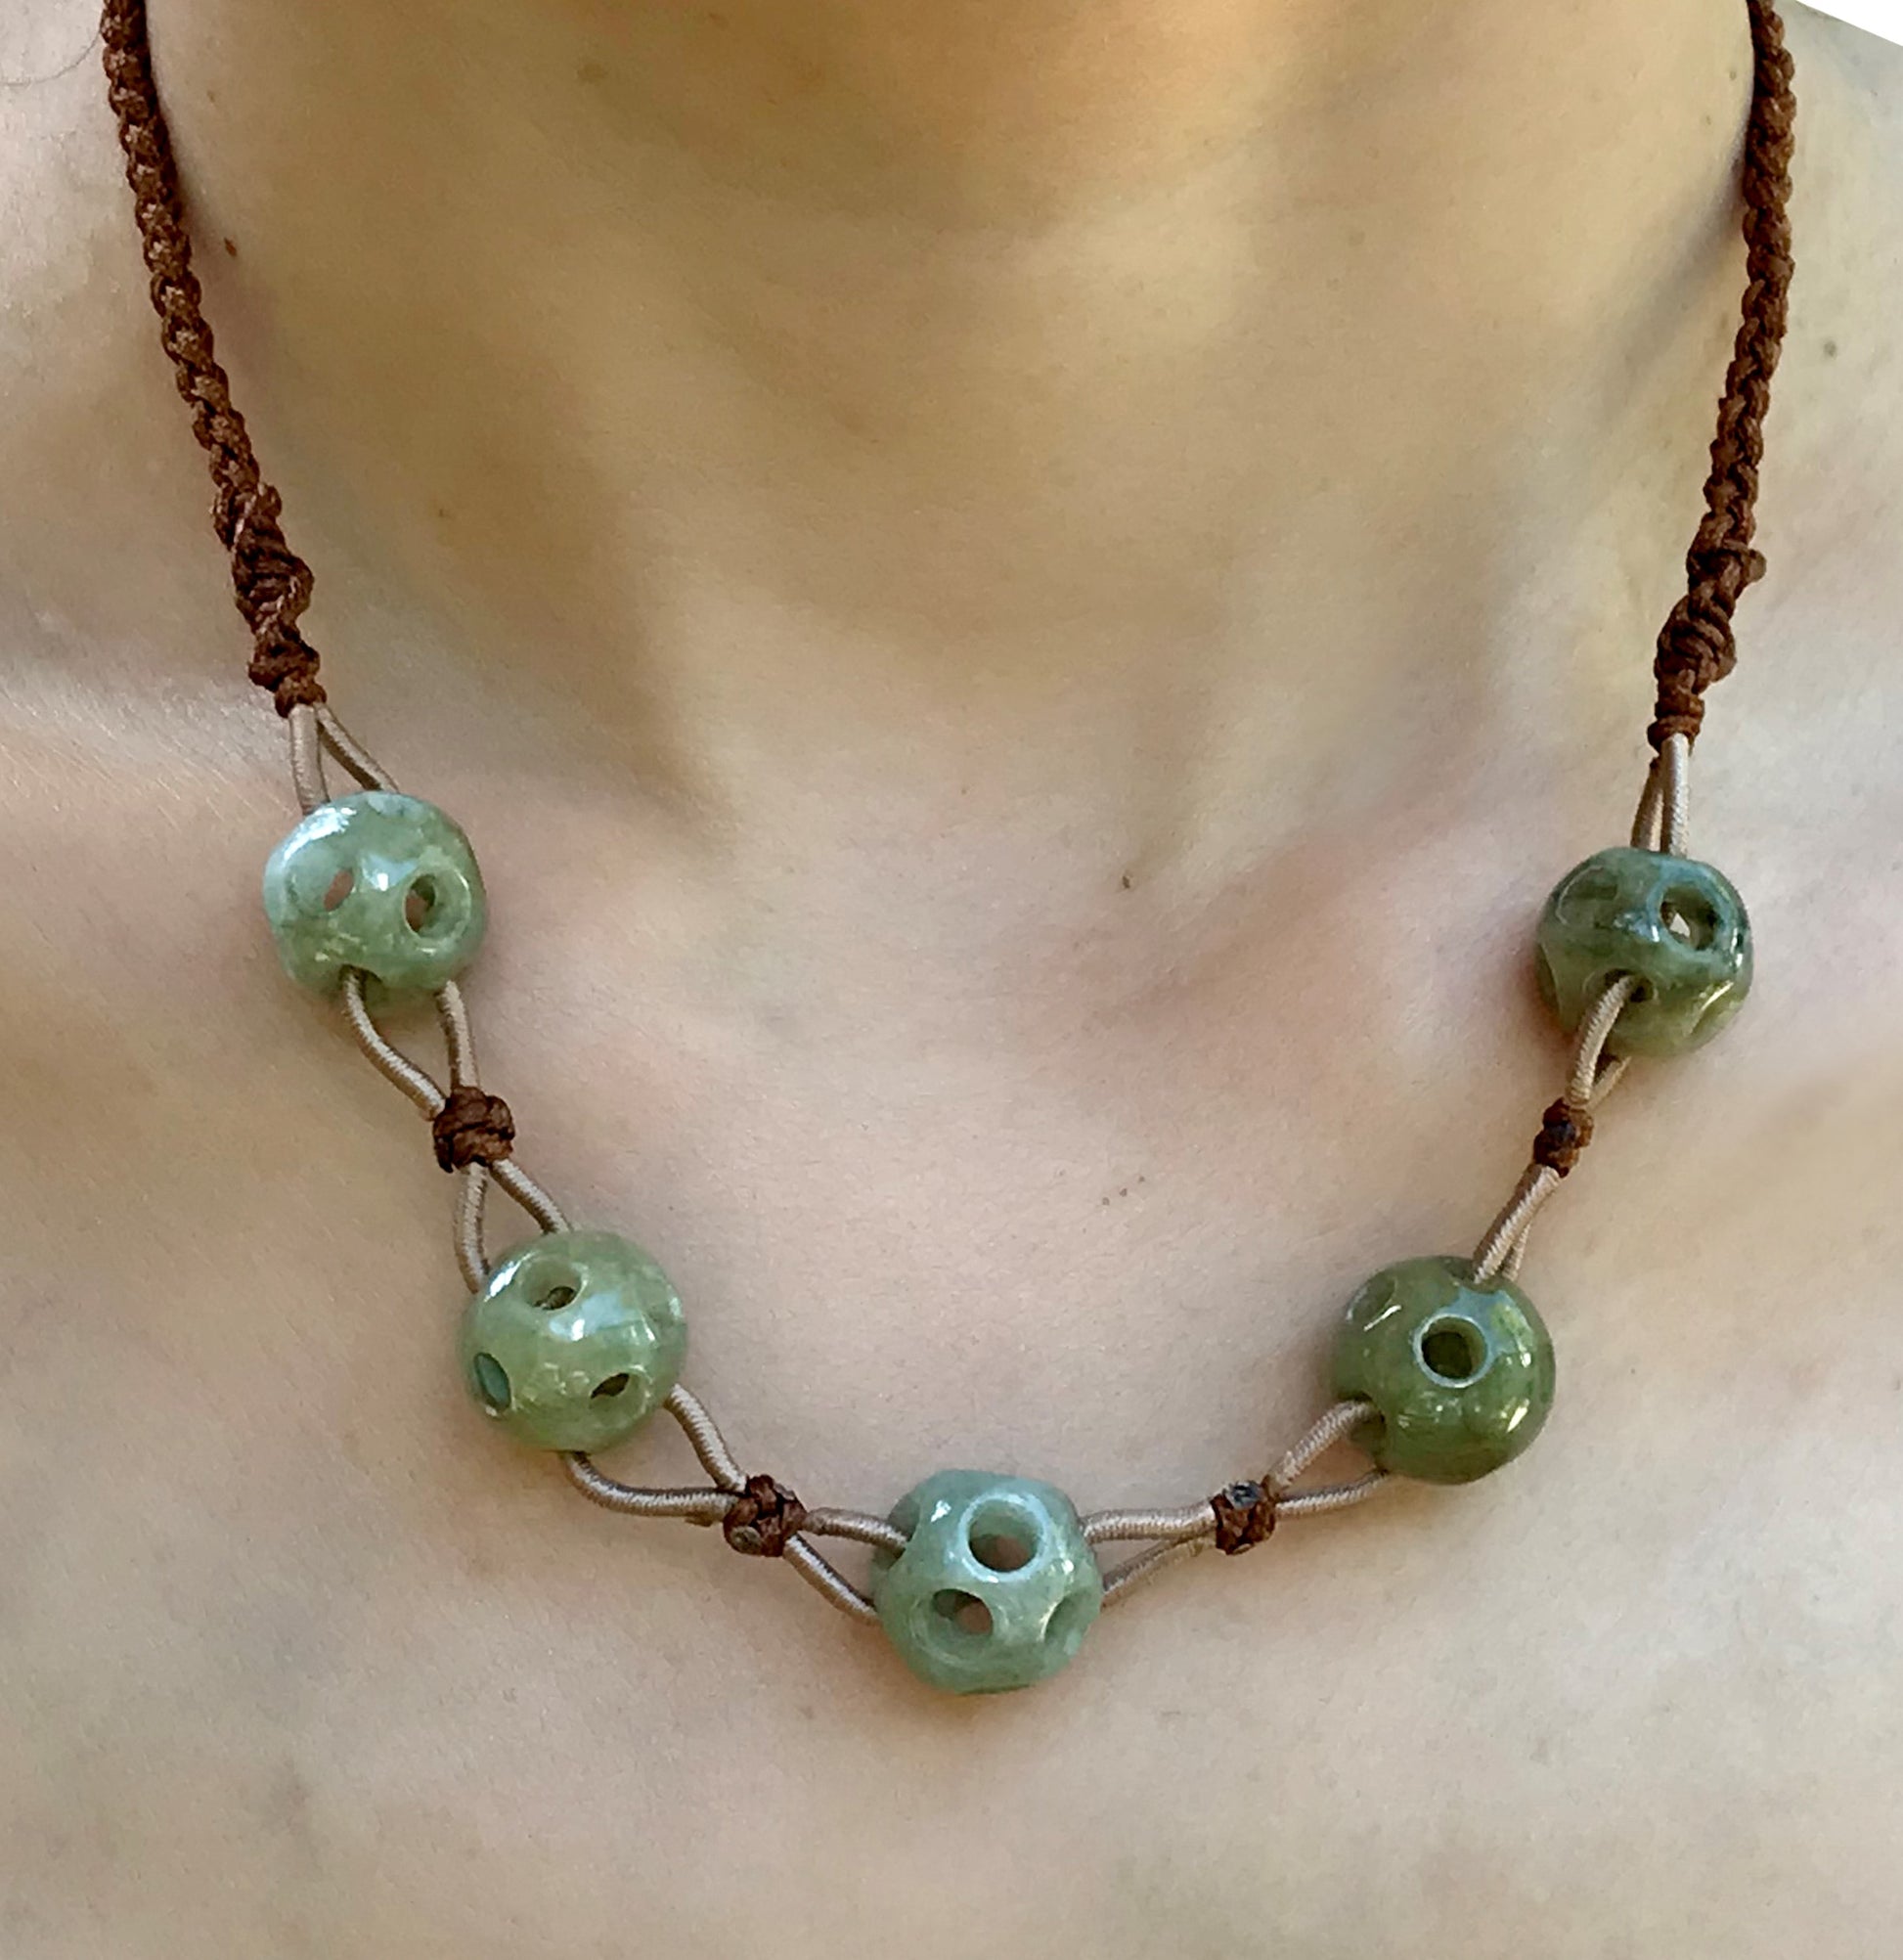 Be Uniquely Stylish with Perforated Spheres Shape Handmade Jade Necklace Pendant made with Brown Cord